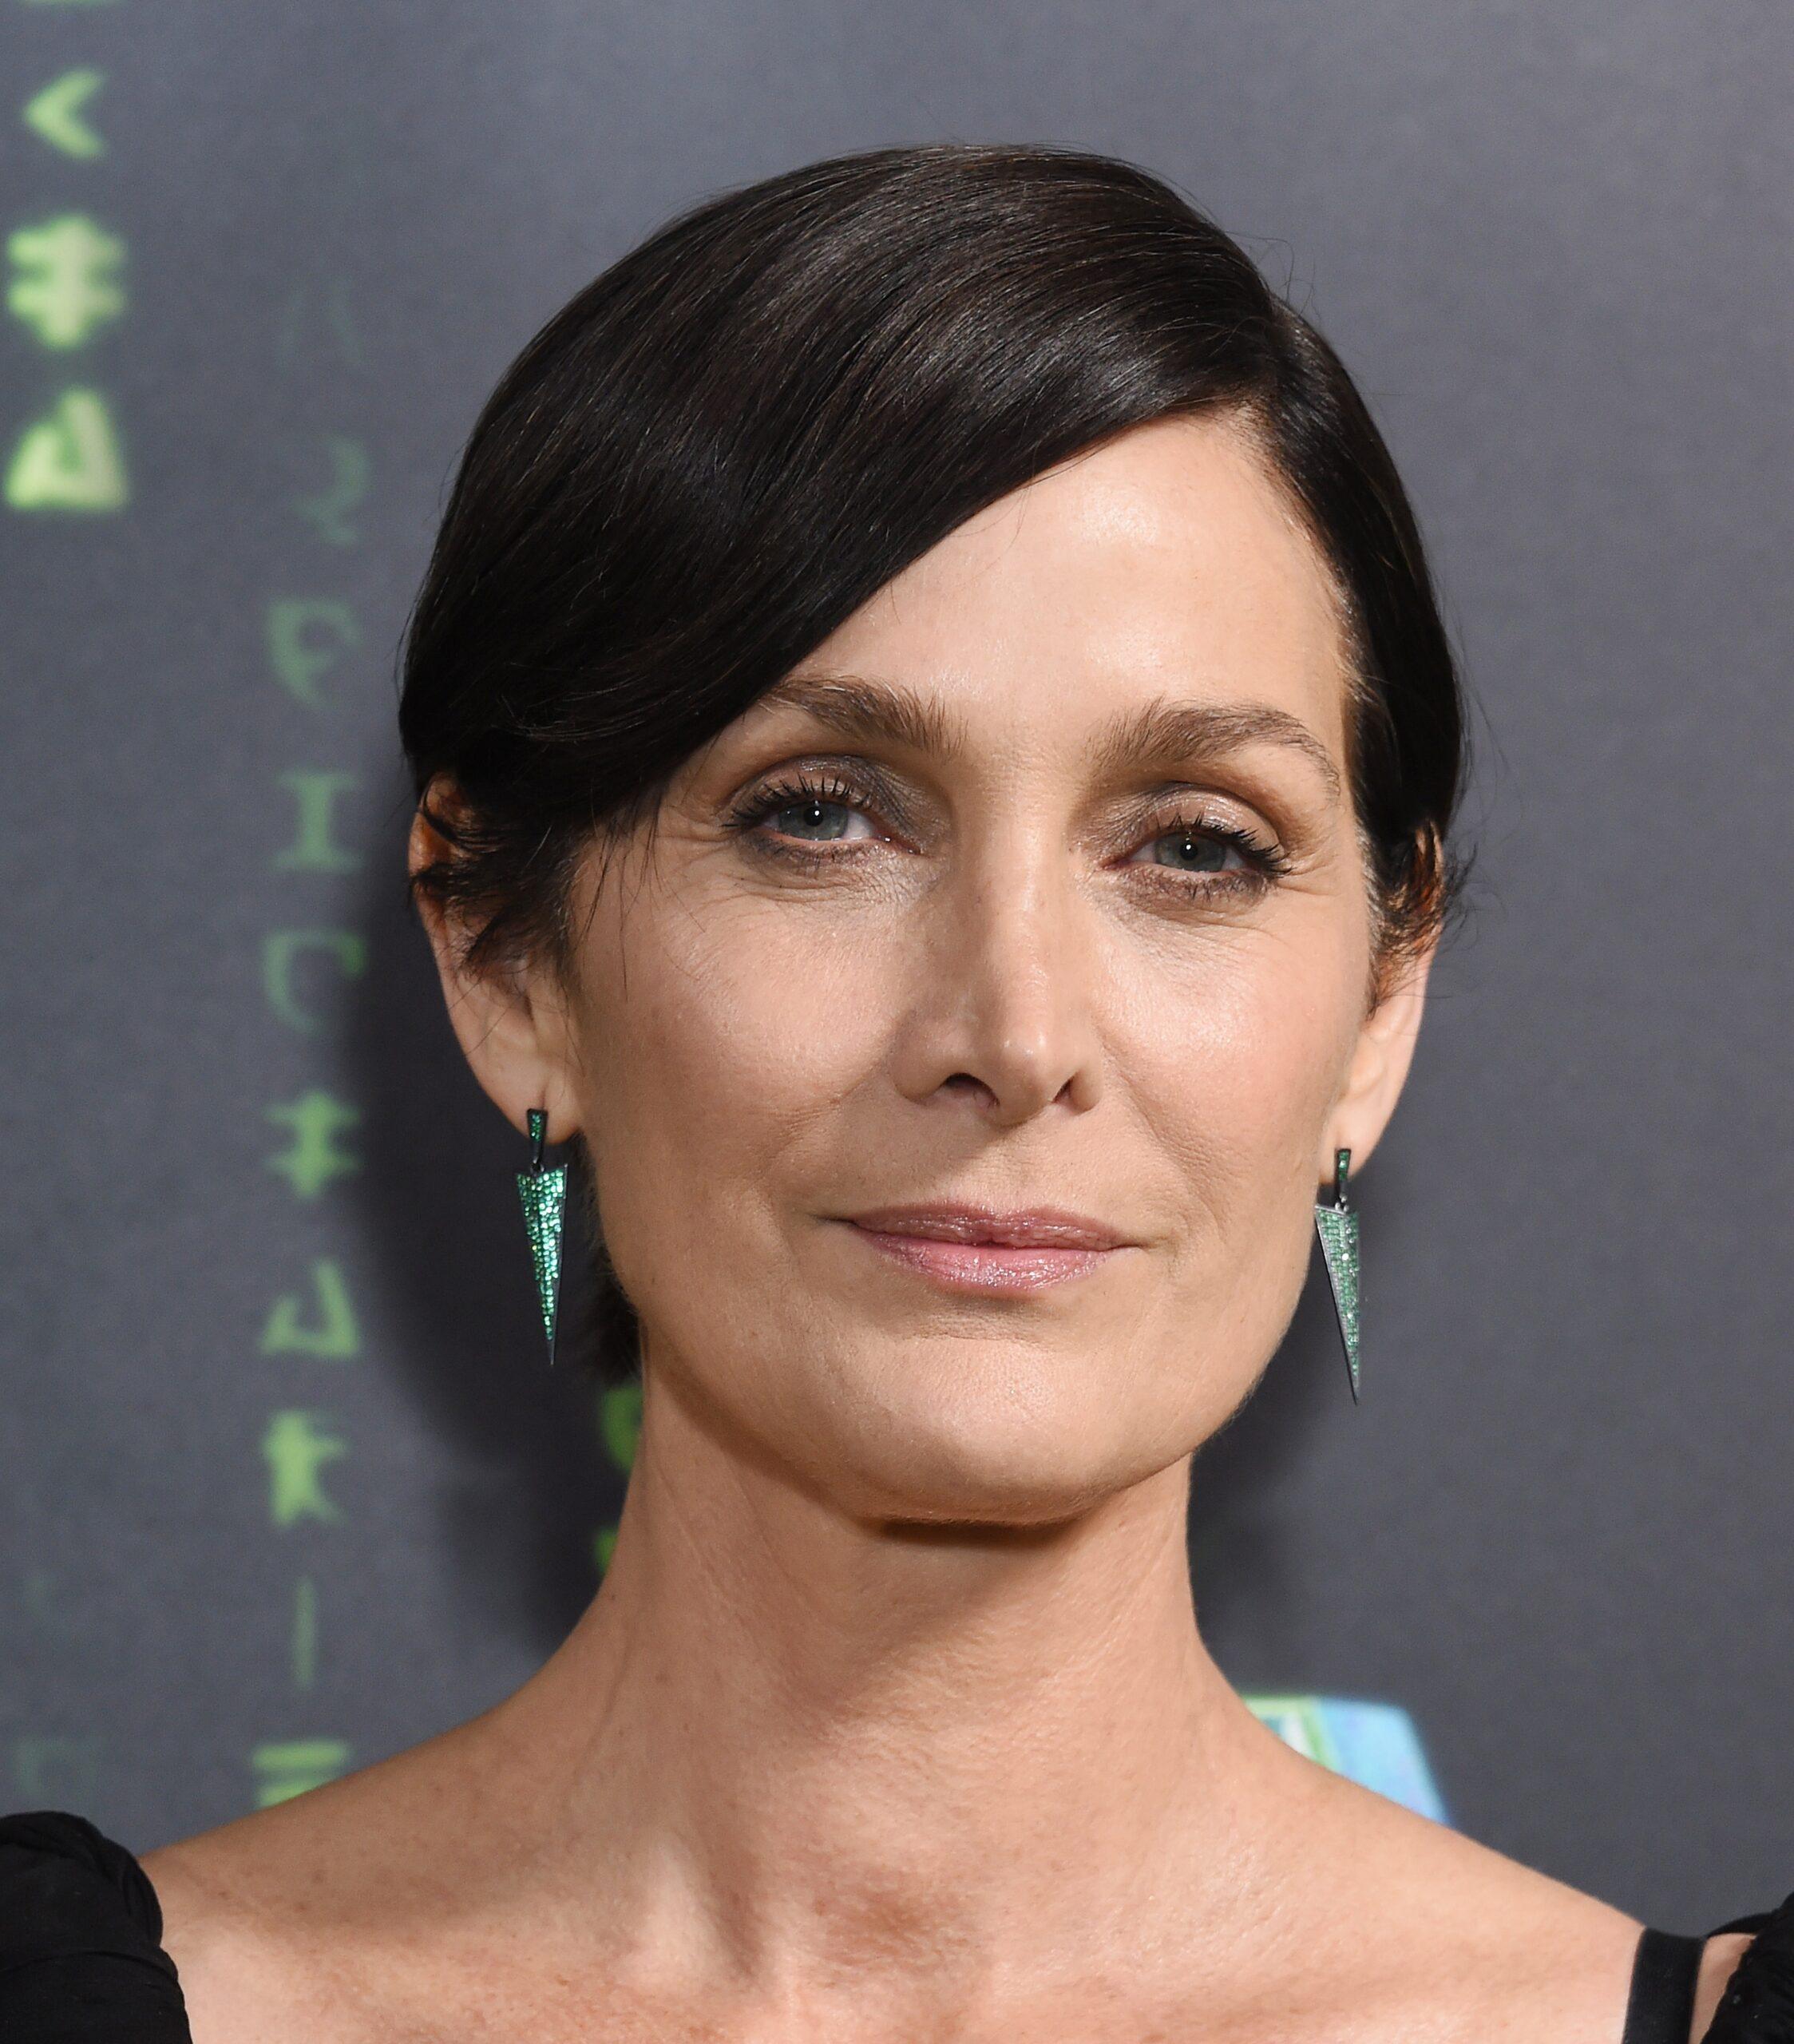 Carrie-Anne Moss at The Matrix Resurrections - San Francisco Premiere